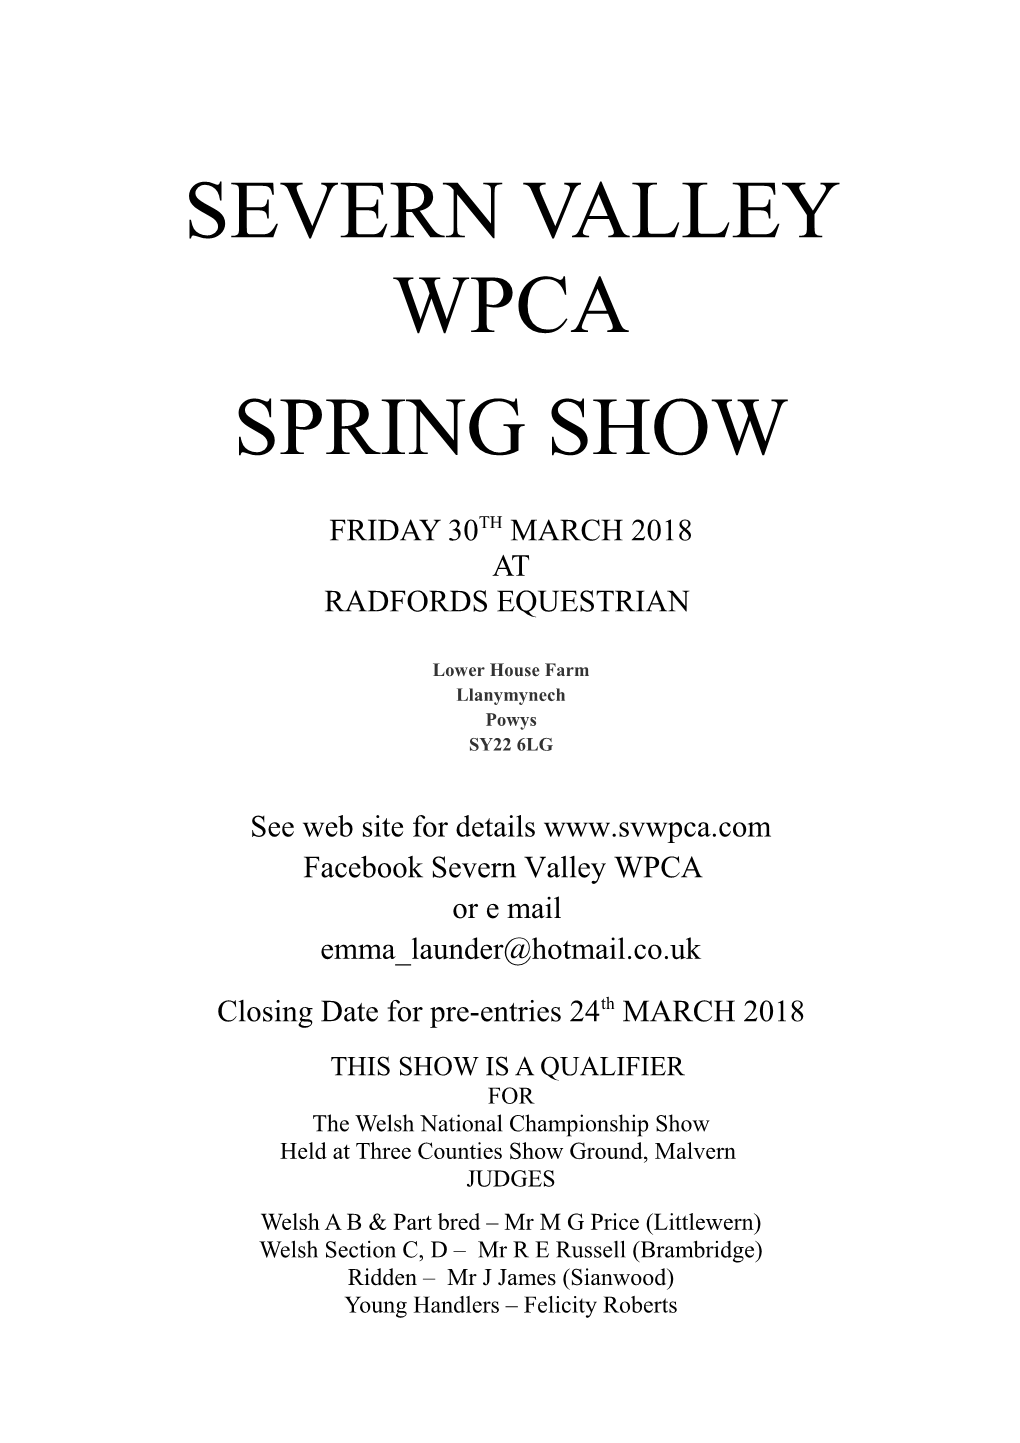 Severn Valley Wpca